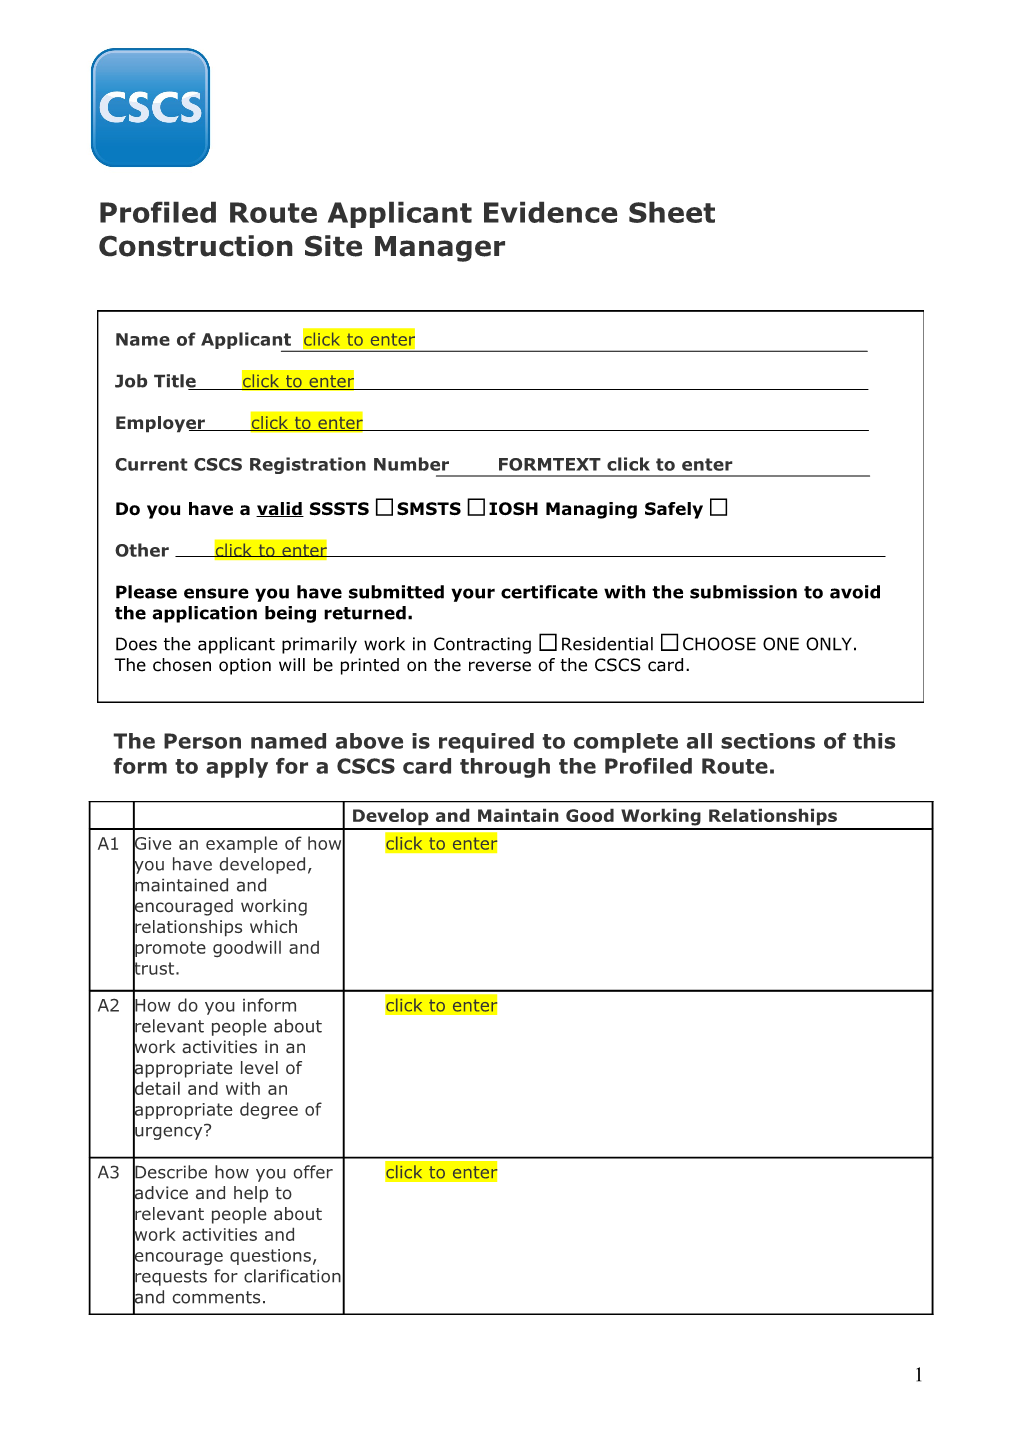 Applicant Evidence Sheet